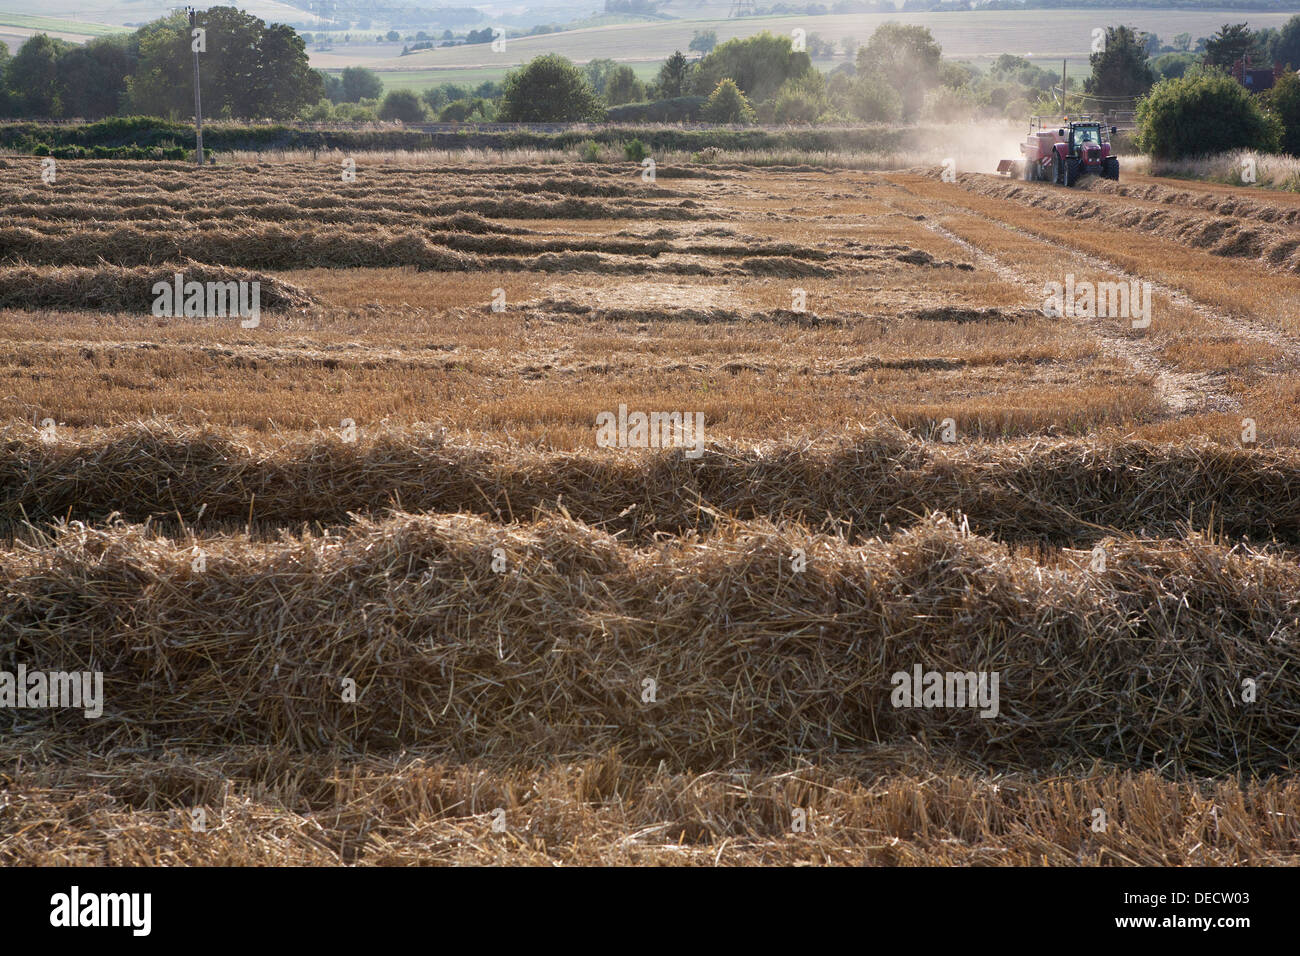 A red Massey Ferguson tractor and baler baling straw in open countryside. Stock Photo